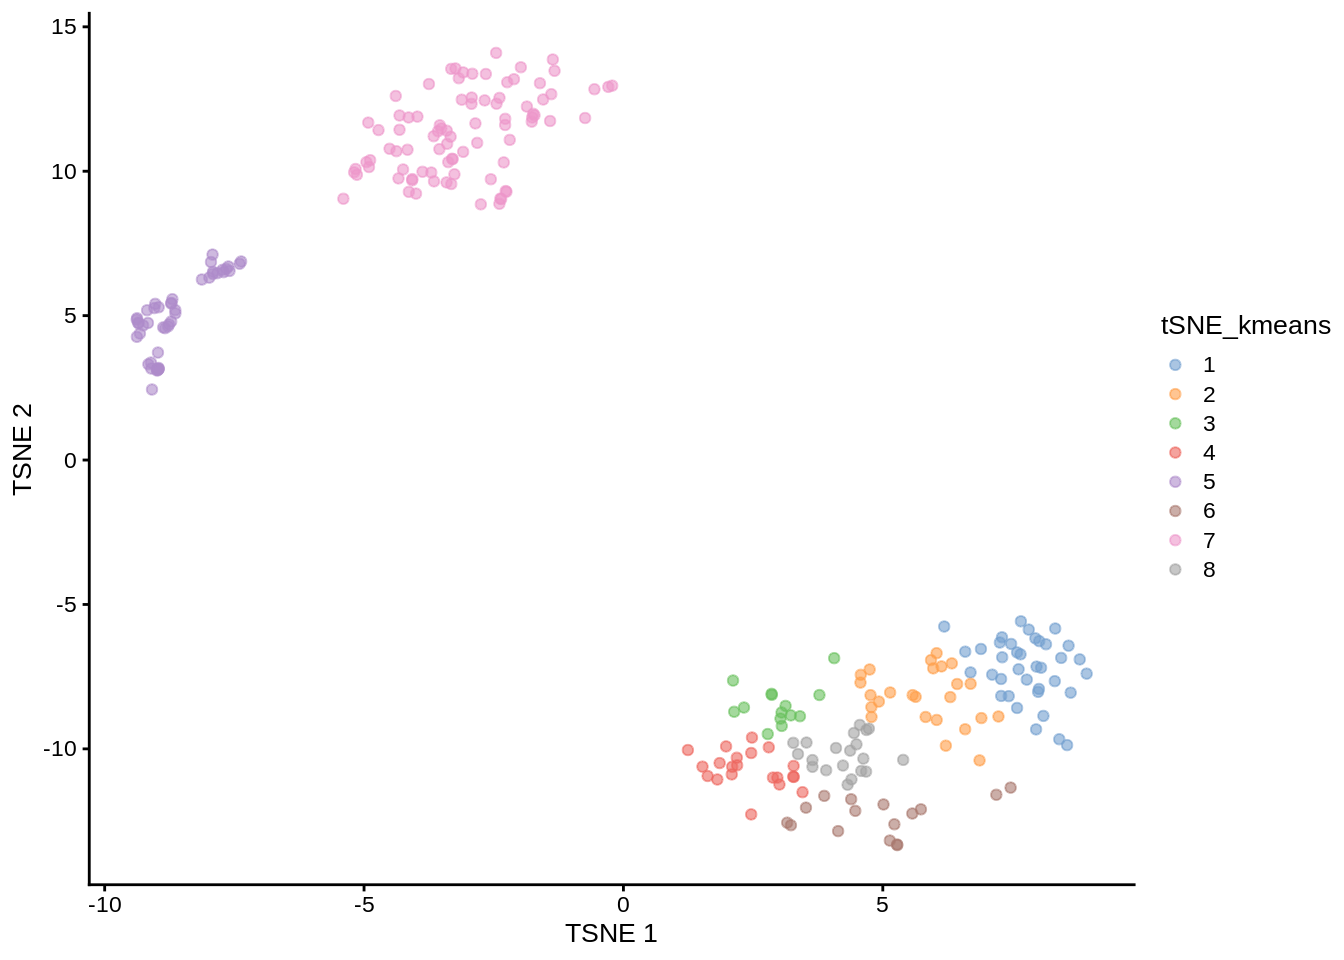 tSNE map of the patient data with 8 colored clusters, identified by the k-means clustering algorithm